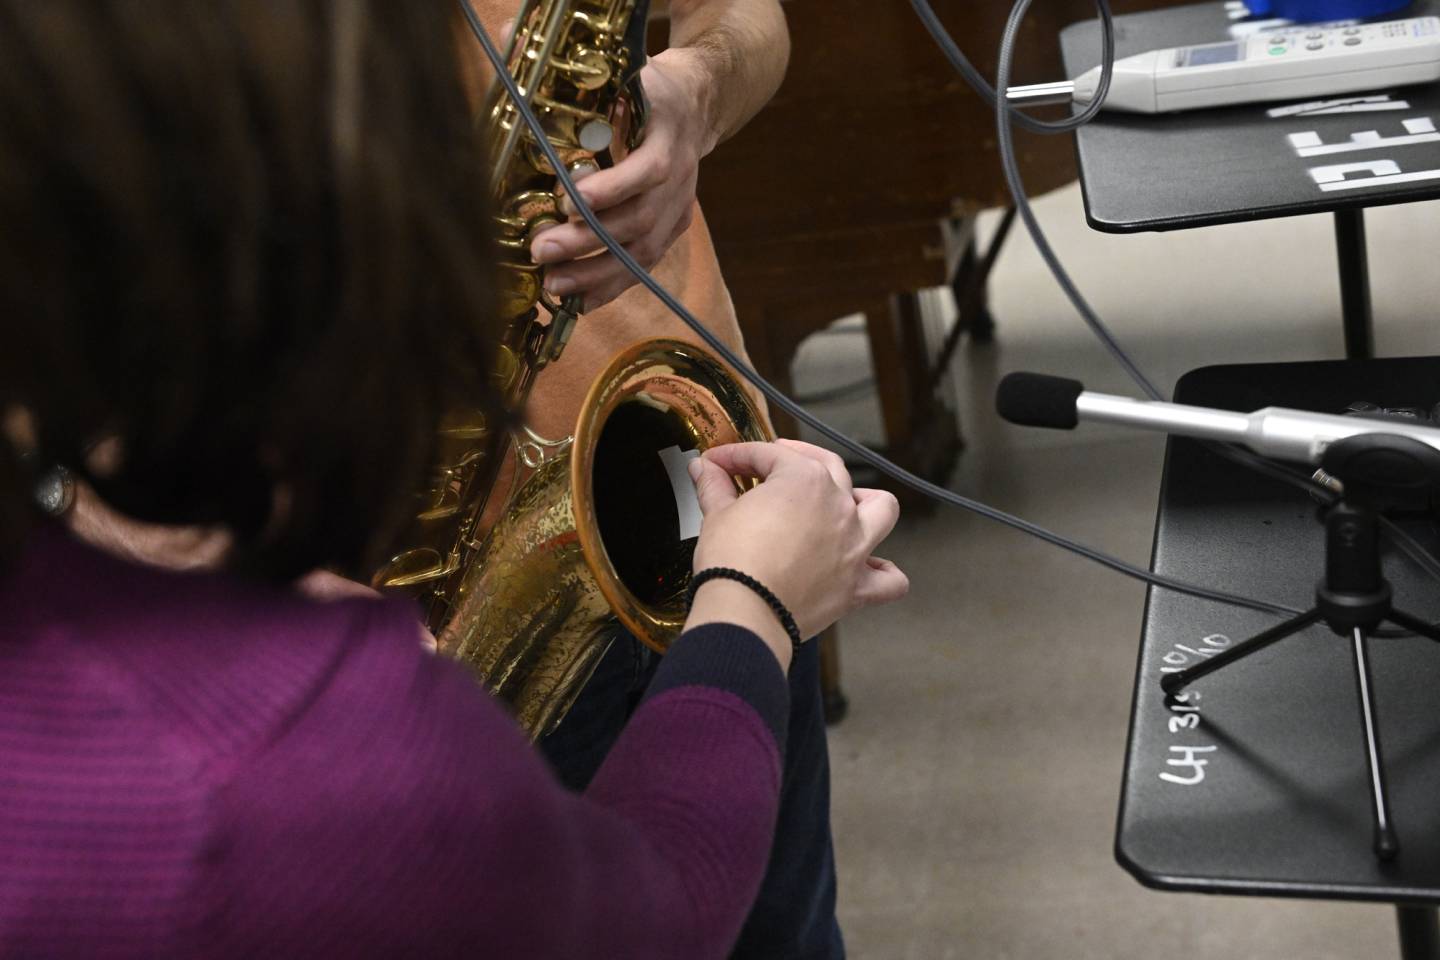 A student attaches a recording device to the bell of a saxophone